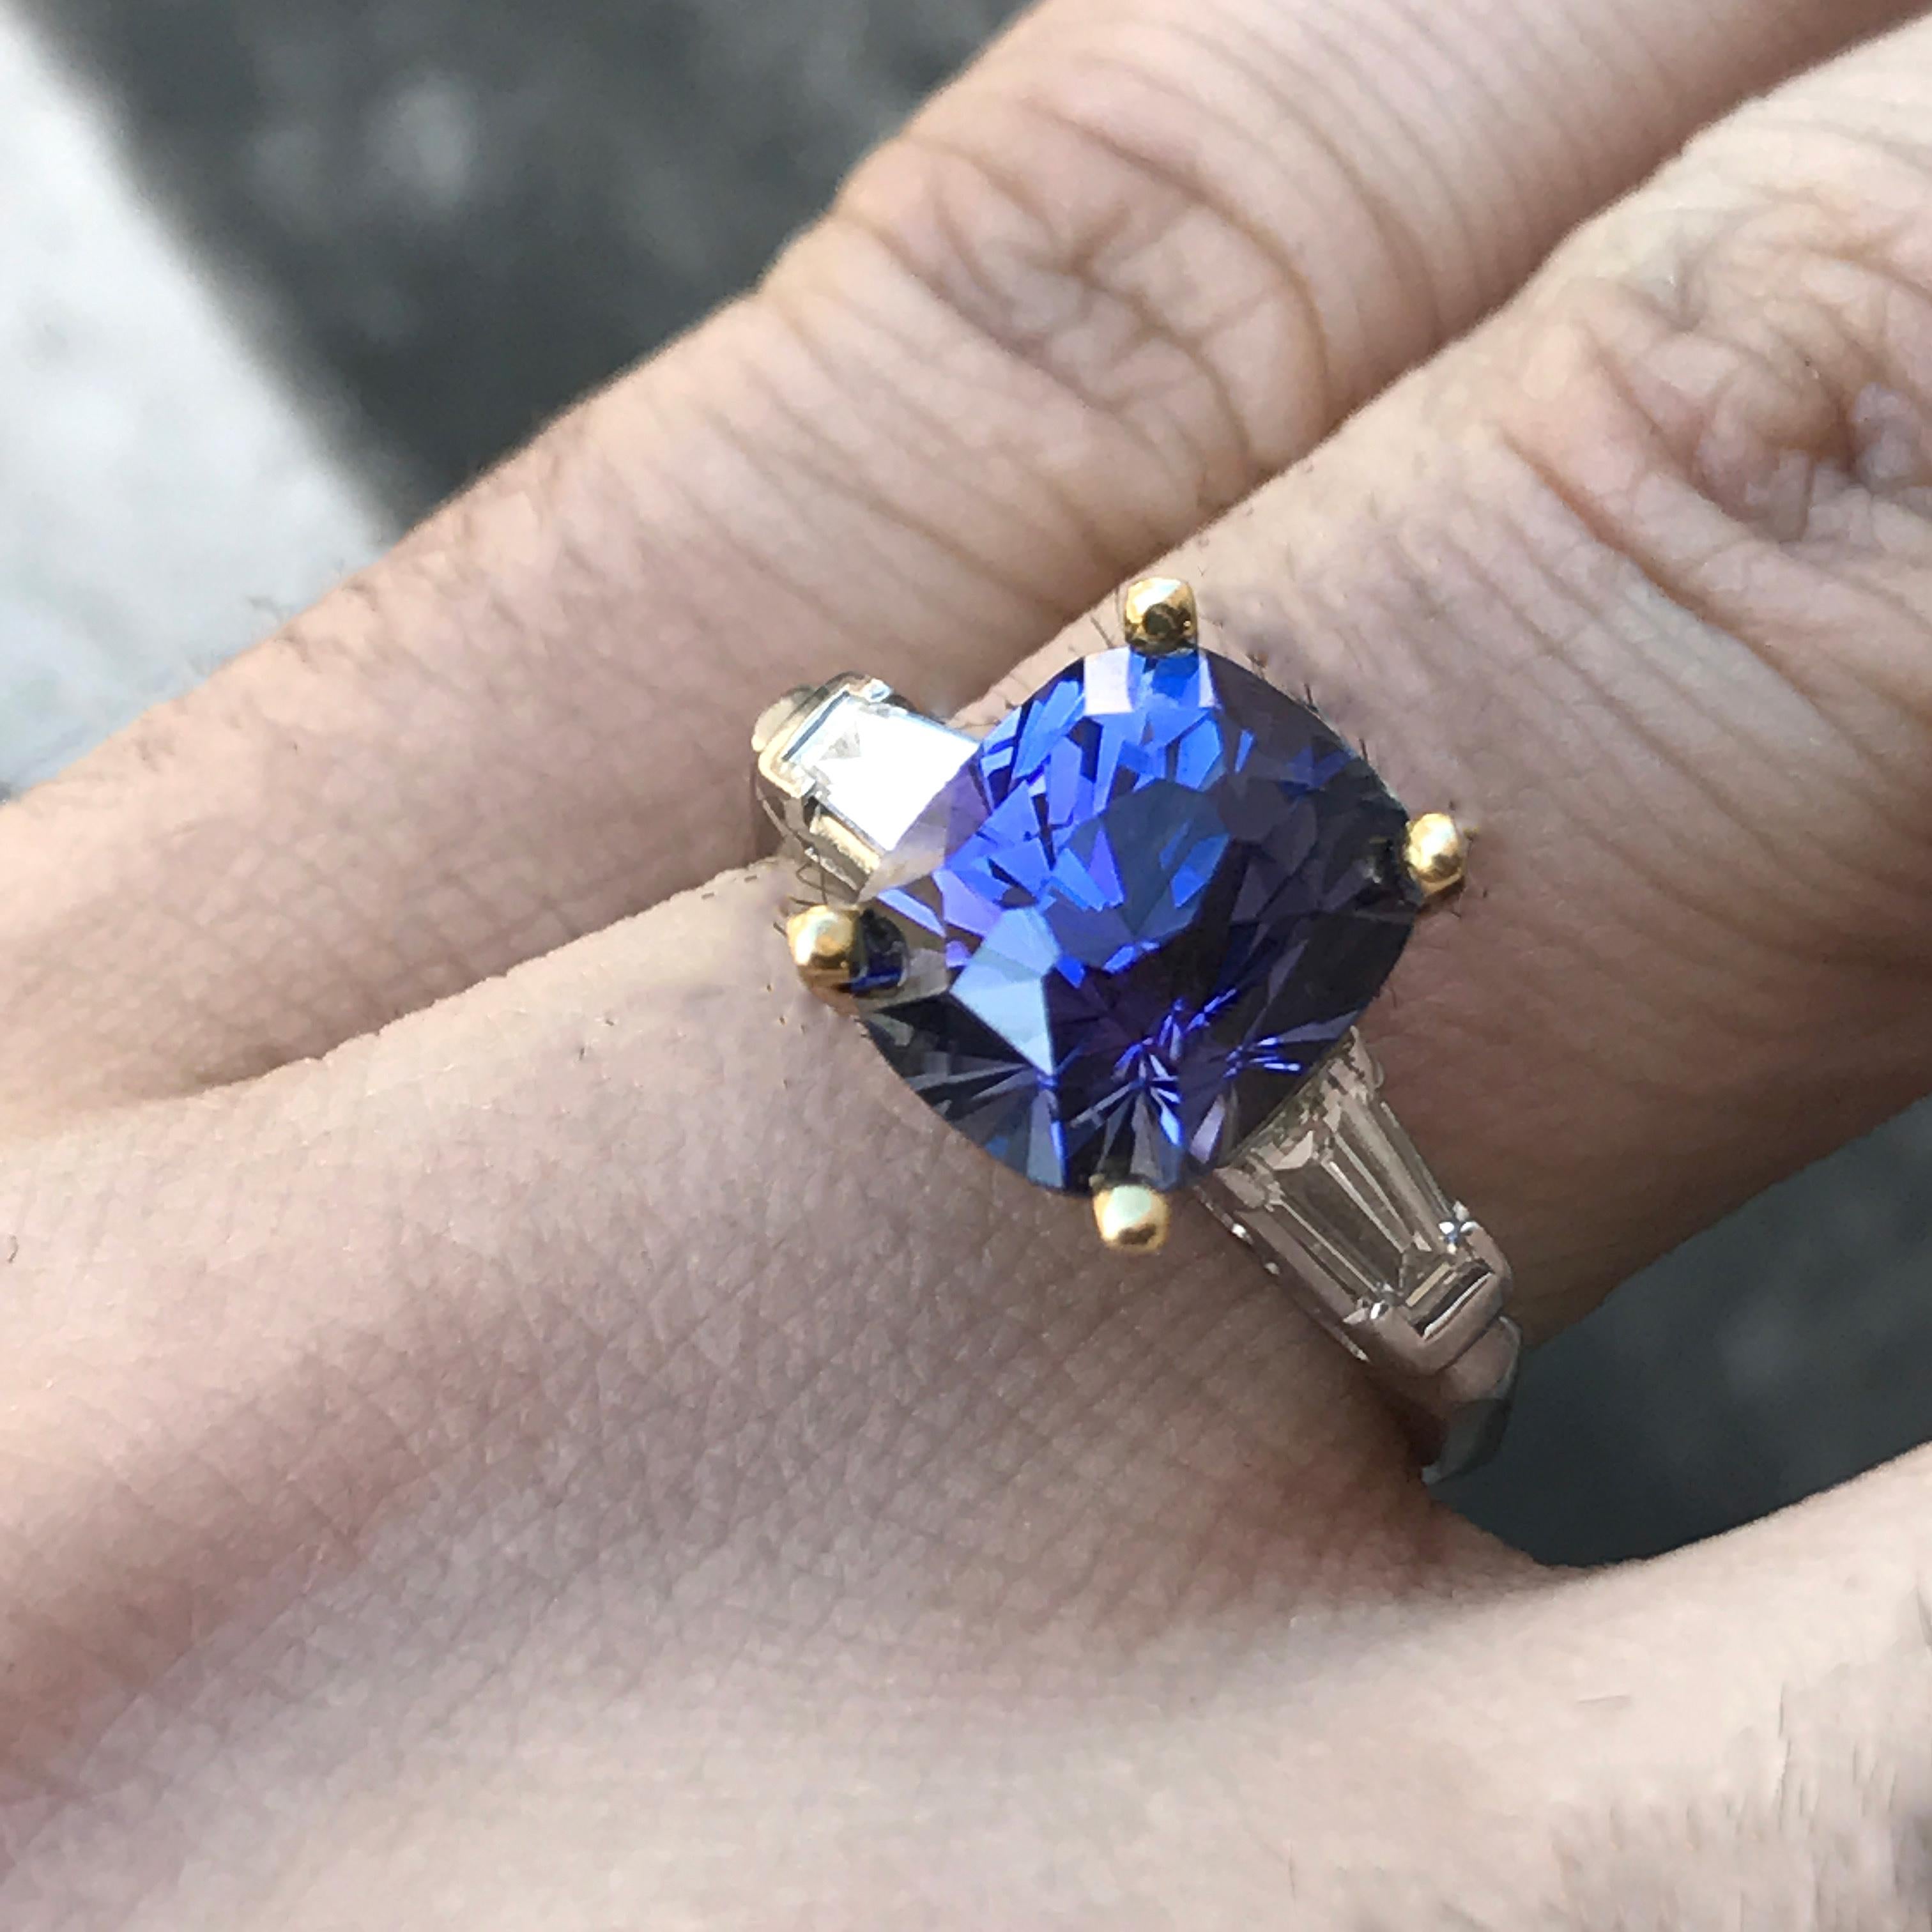 BSO00001
Ring may have to be made to order depending on finger size , please allow 3 to 6 weeks but if you have a sooner delivery date needed let us know and we will see if we can accommodate you.

Stunning 4 Carat Apprx+ Vivid Blueish Purple